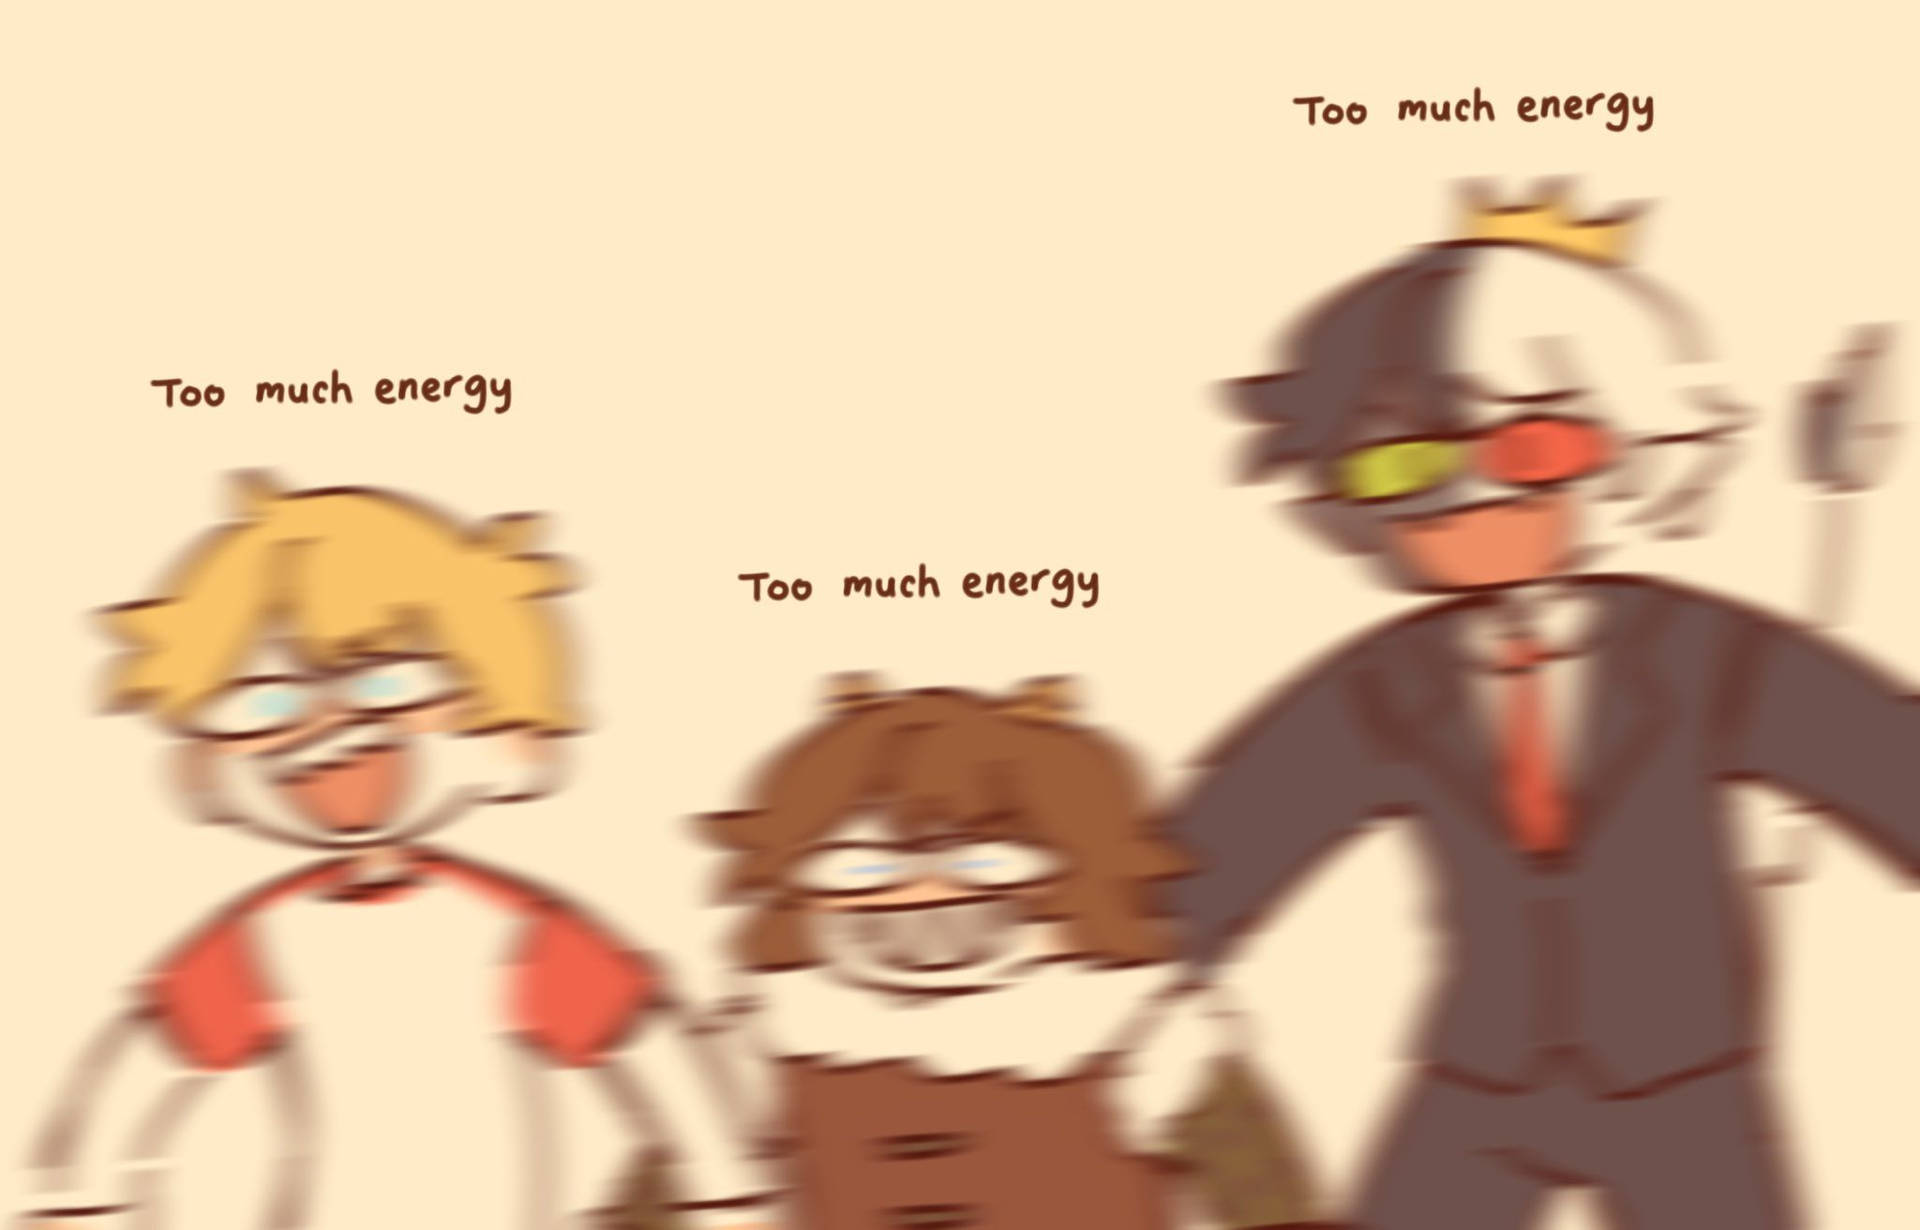 Bench Trio Too Much Energy Meme Wallpaper